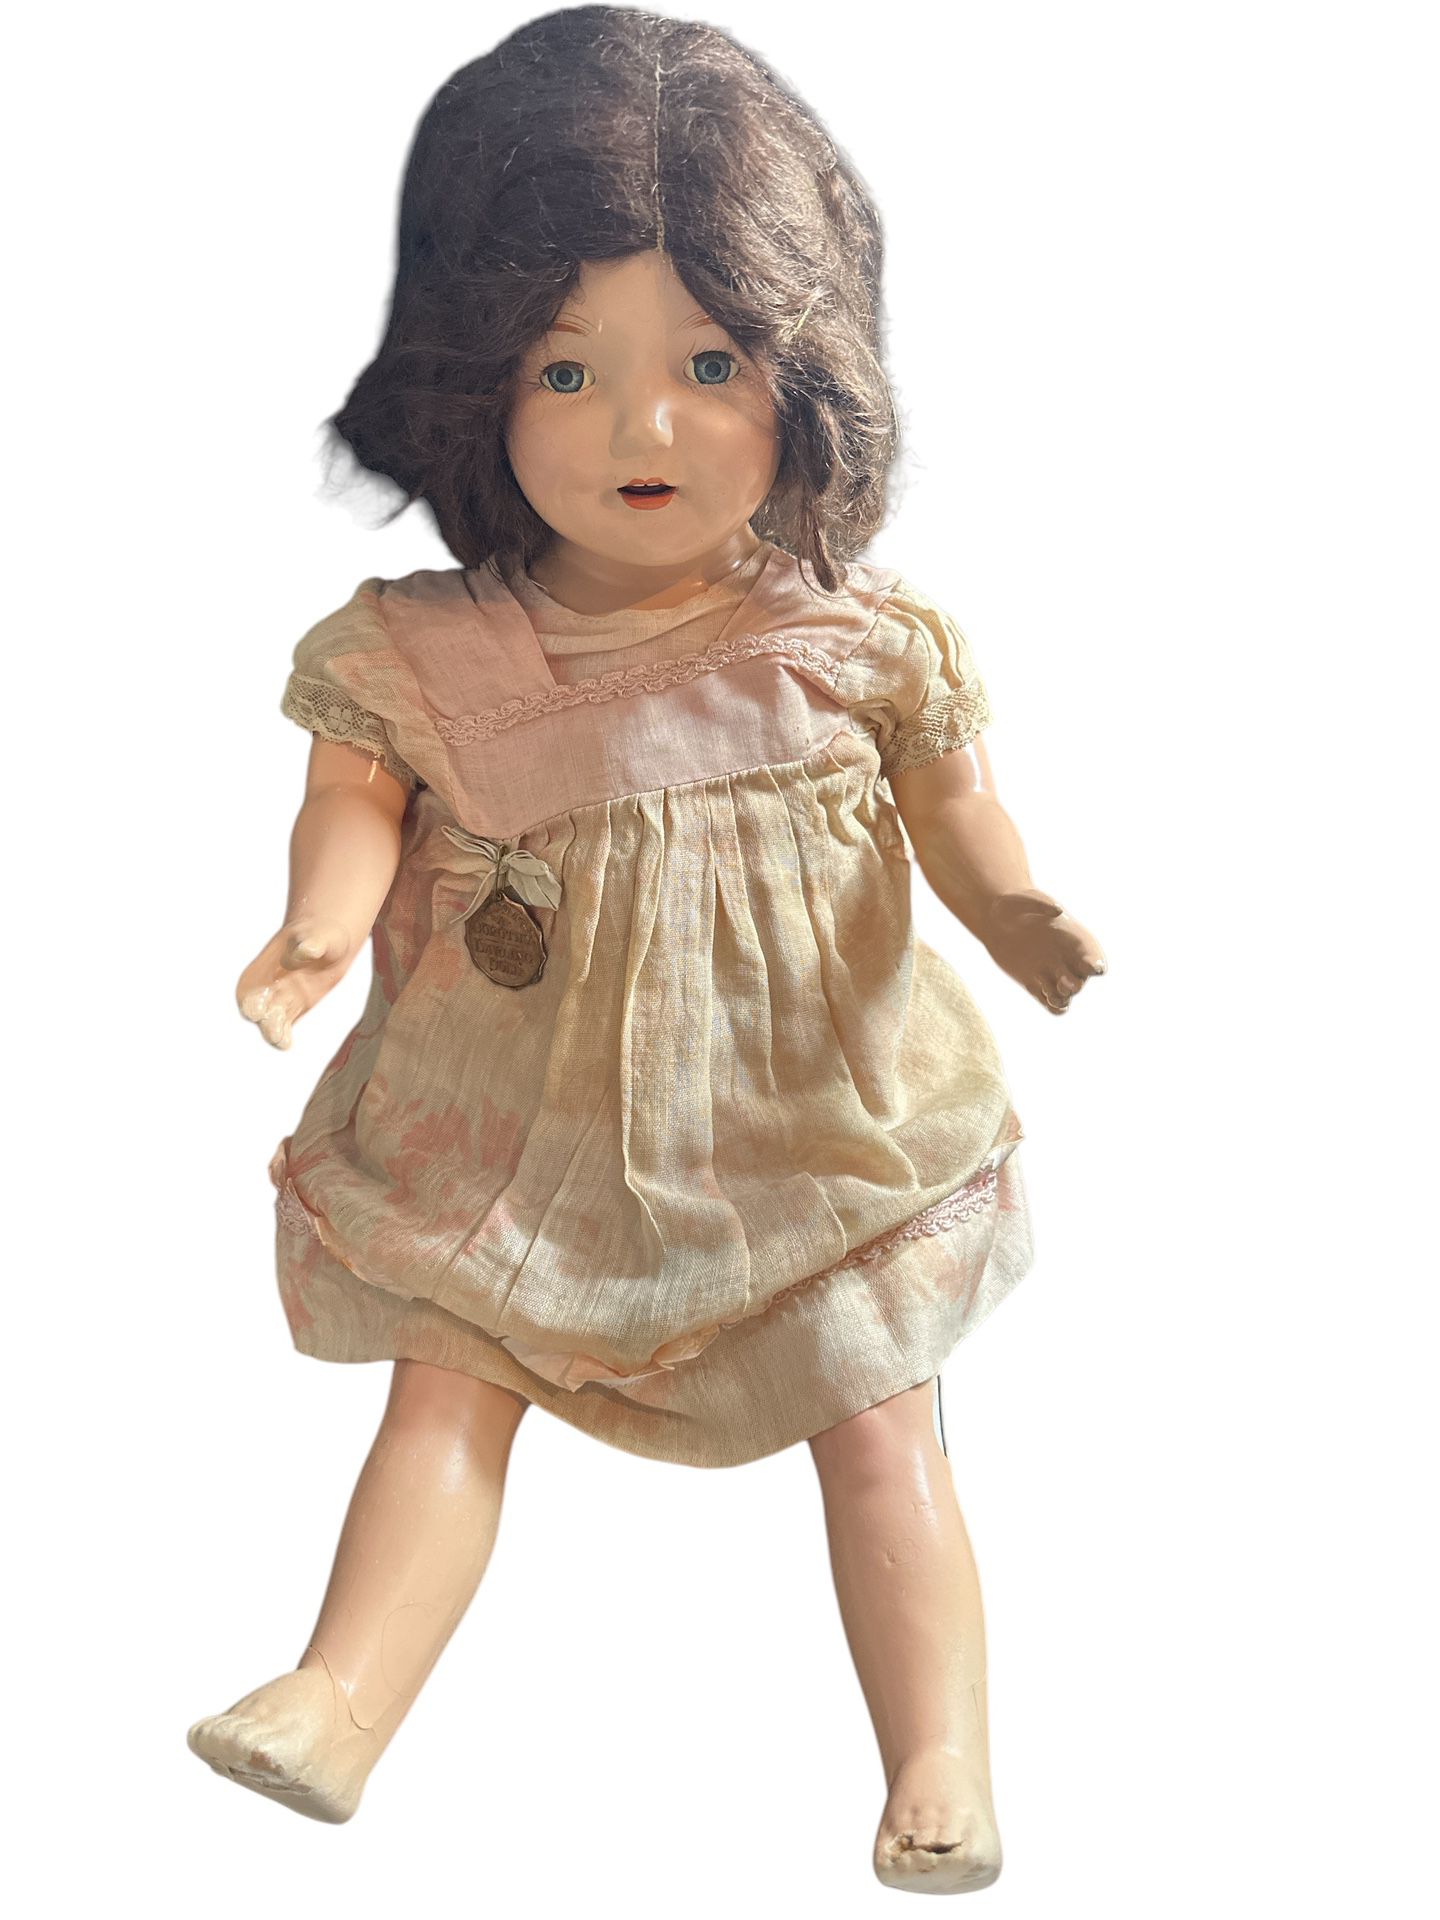 22” 1930’s I am Dorothy Darling rare in this condition doll . Original pin and clothes there is some deterioration do to age 80 years old please look 